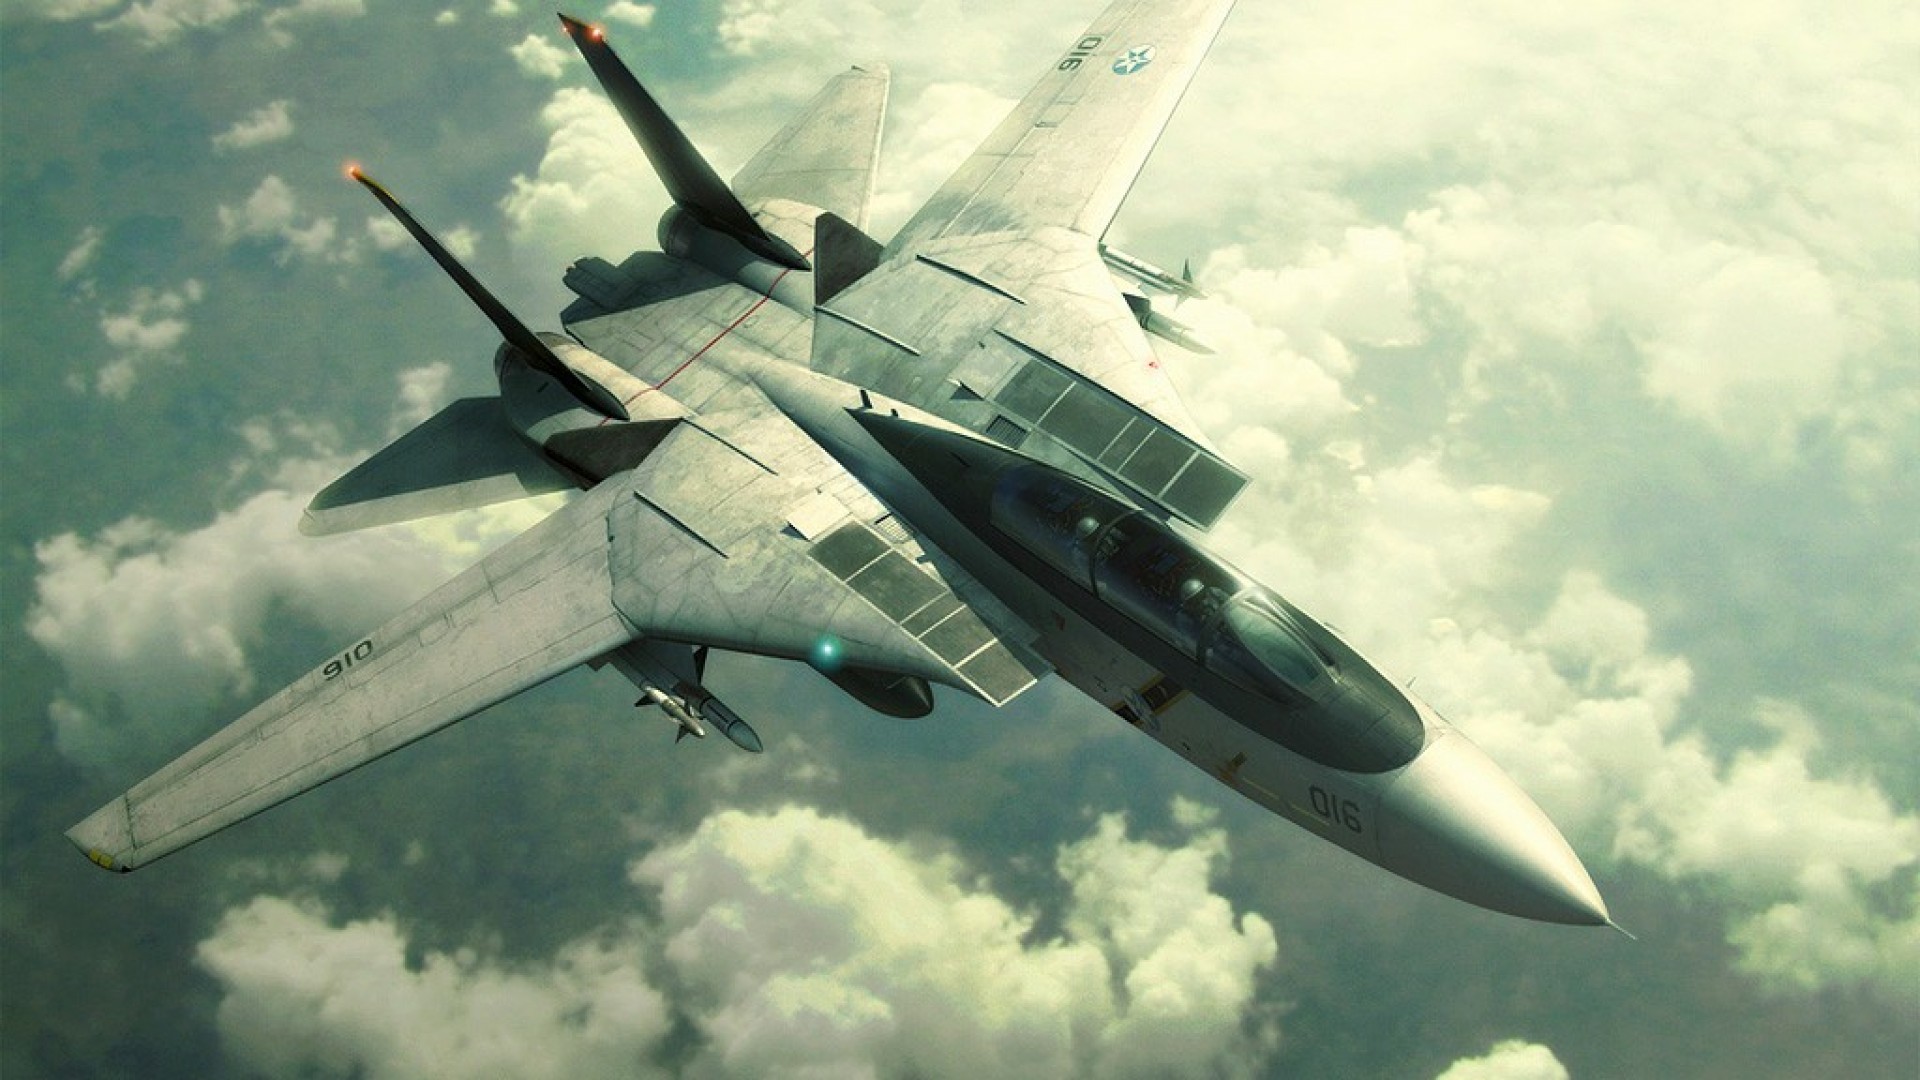 ace, Combat, Game, Jet, Airplane, Aircraft, Fighter, Plane, Military, Sky, Clouds Wallpaper